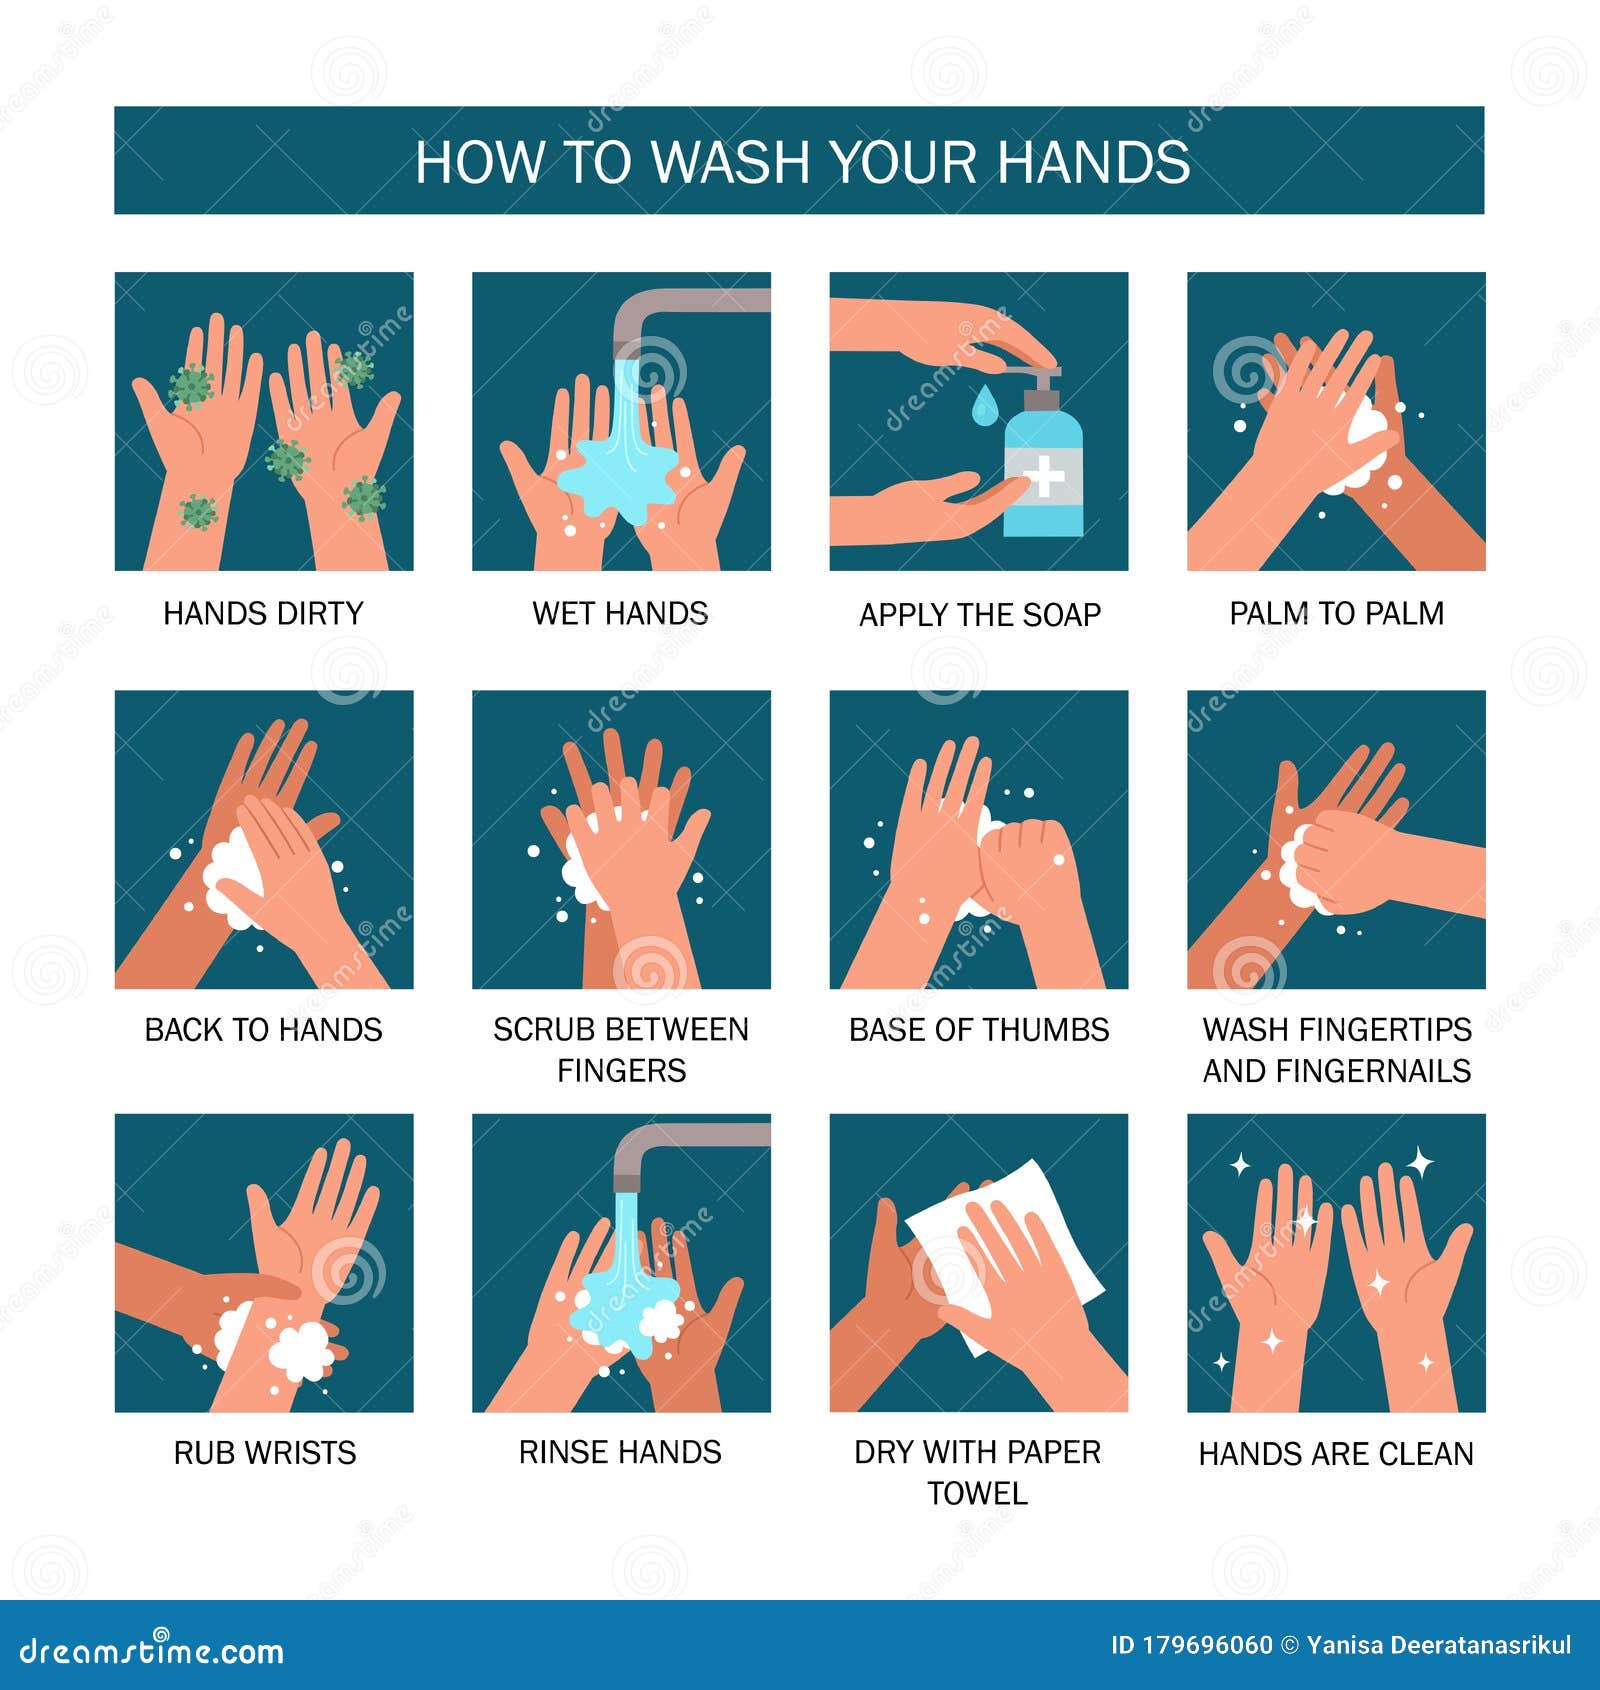 healthcare educational infographic shows steps of how to wash your hands.